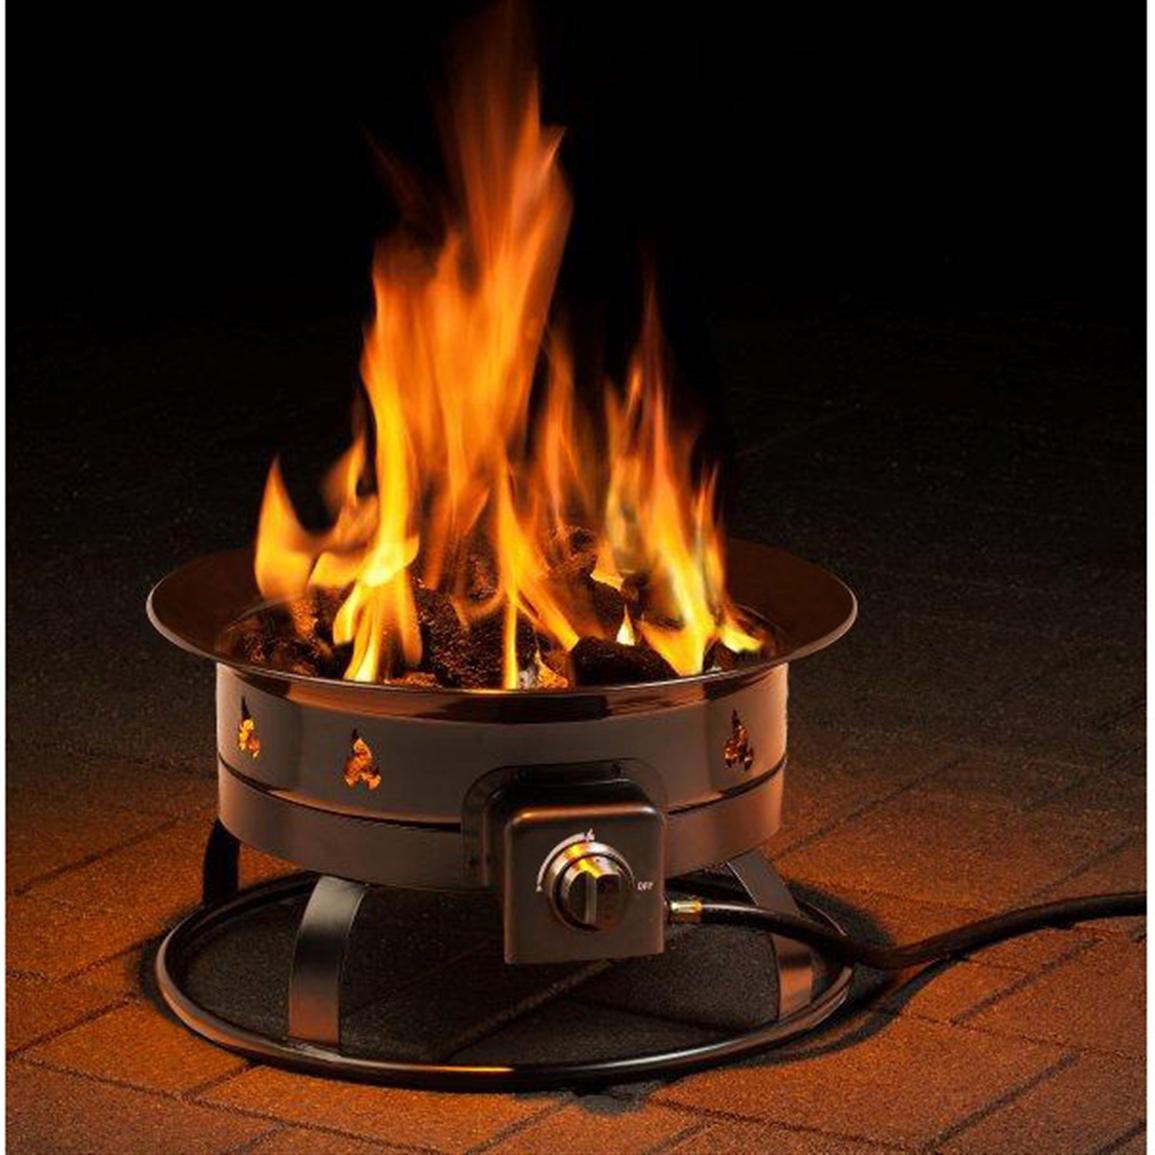 Heininger™ Portable Propane Outdoor Fire Pit - 233453, Fire Pits